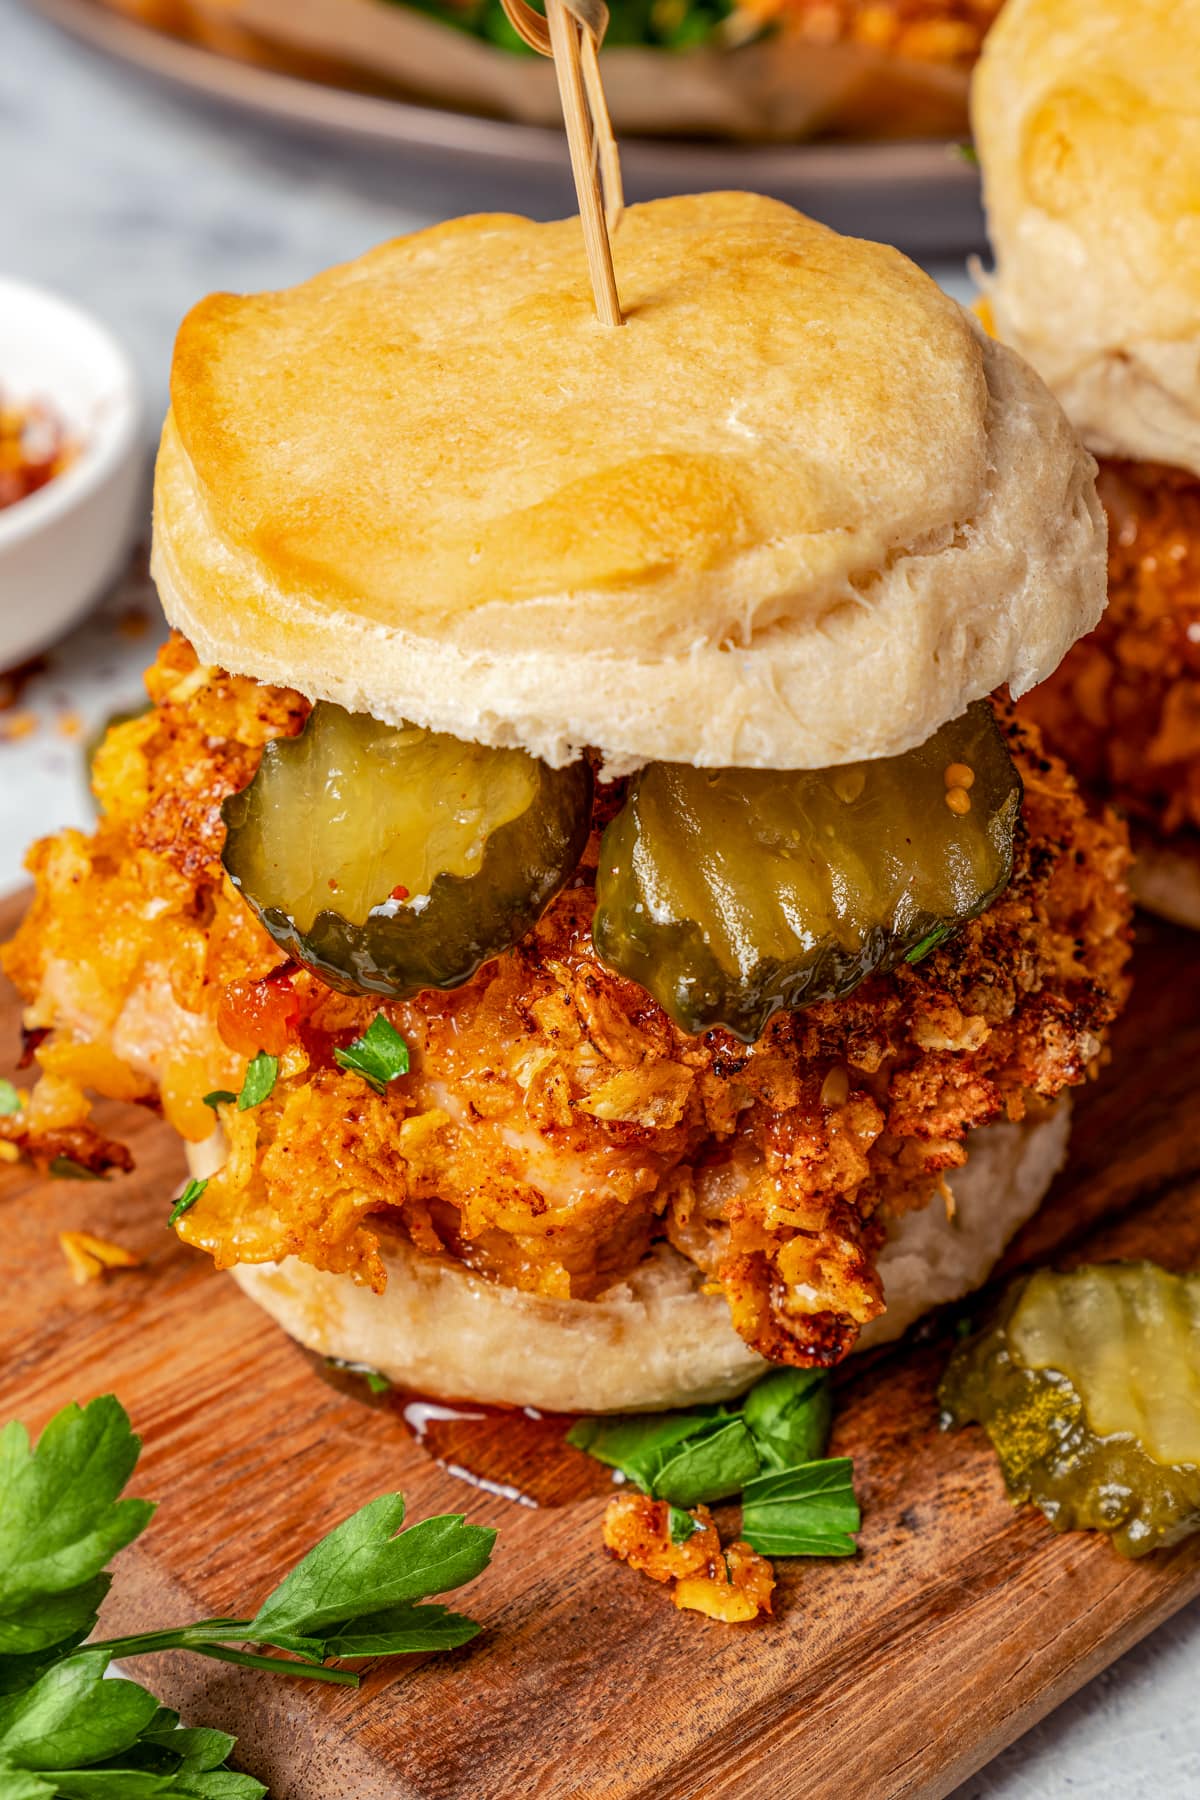 Hot honey chicken in a sandwich with pickle slices.